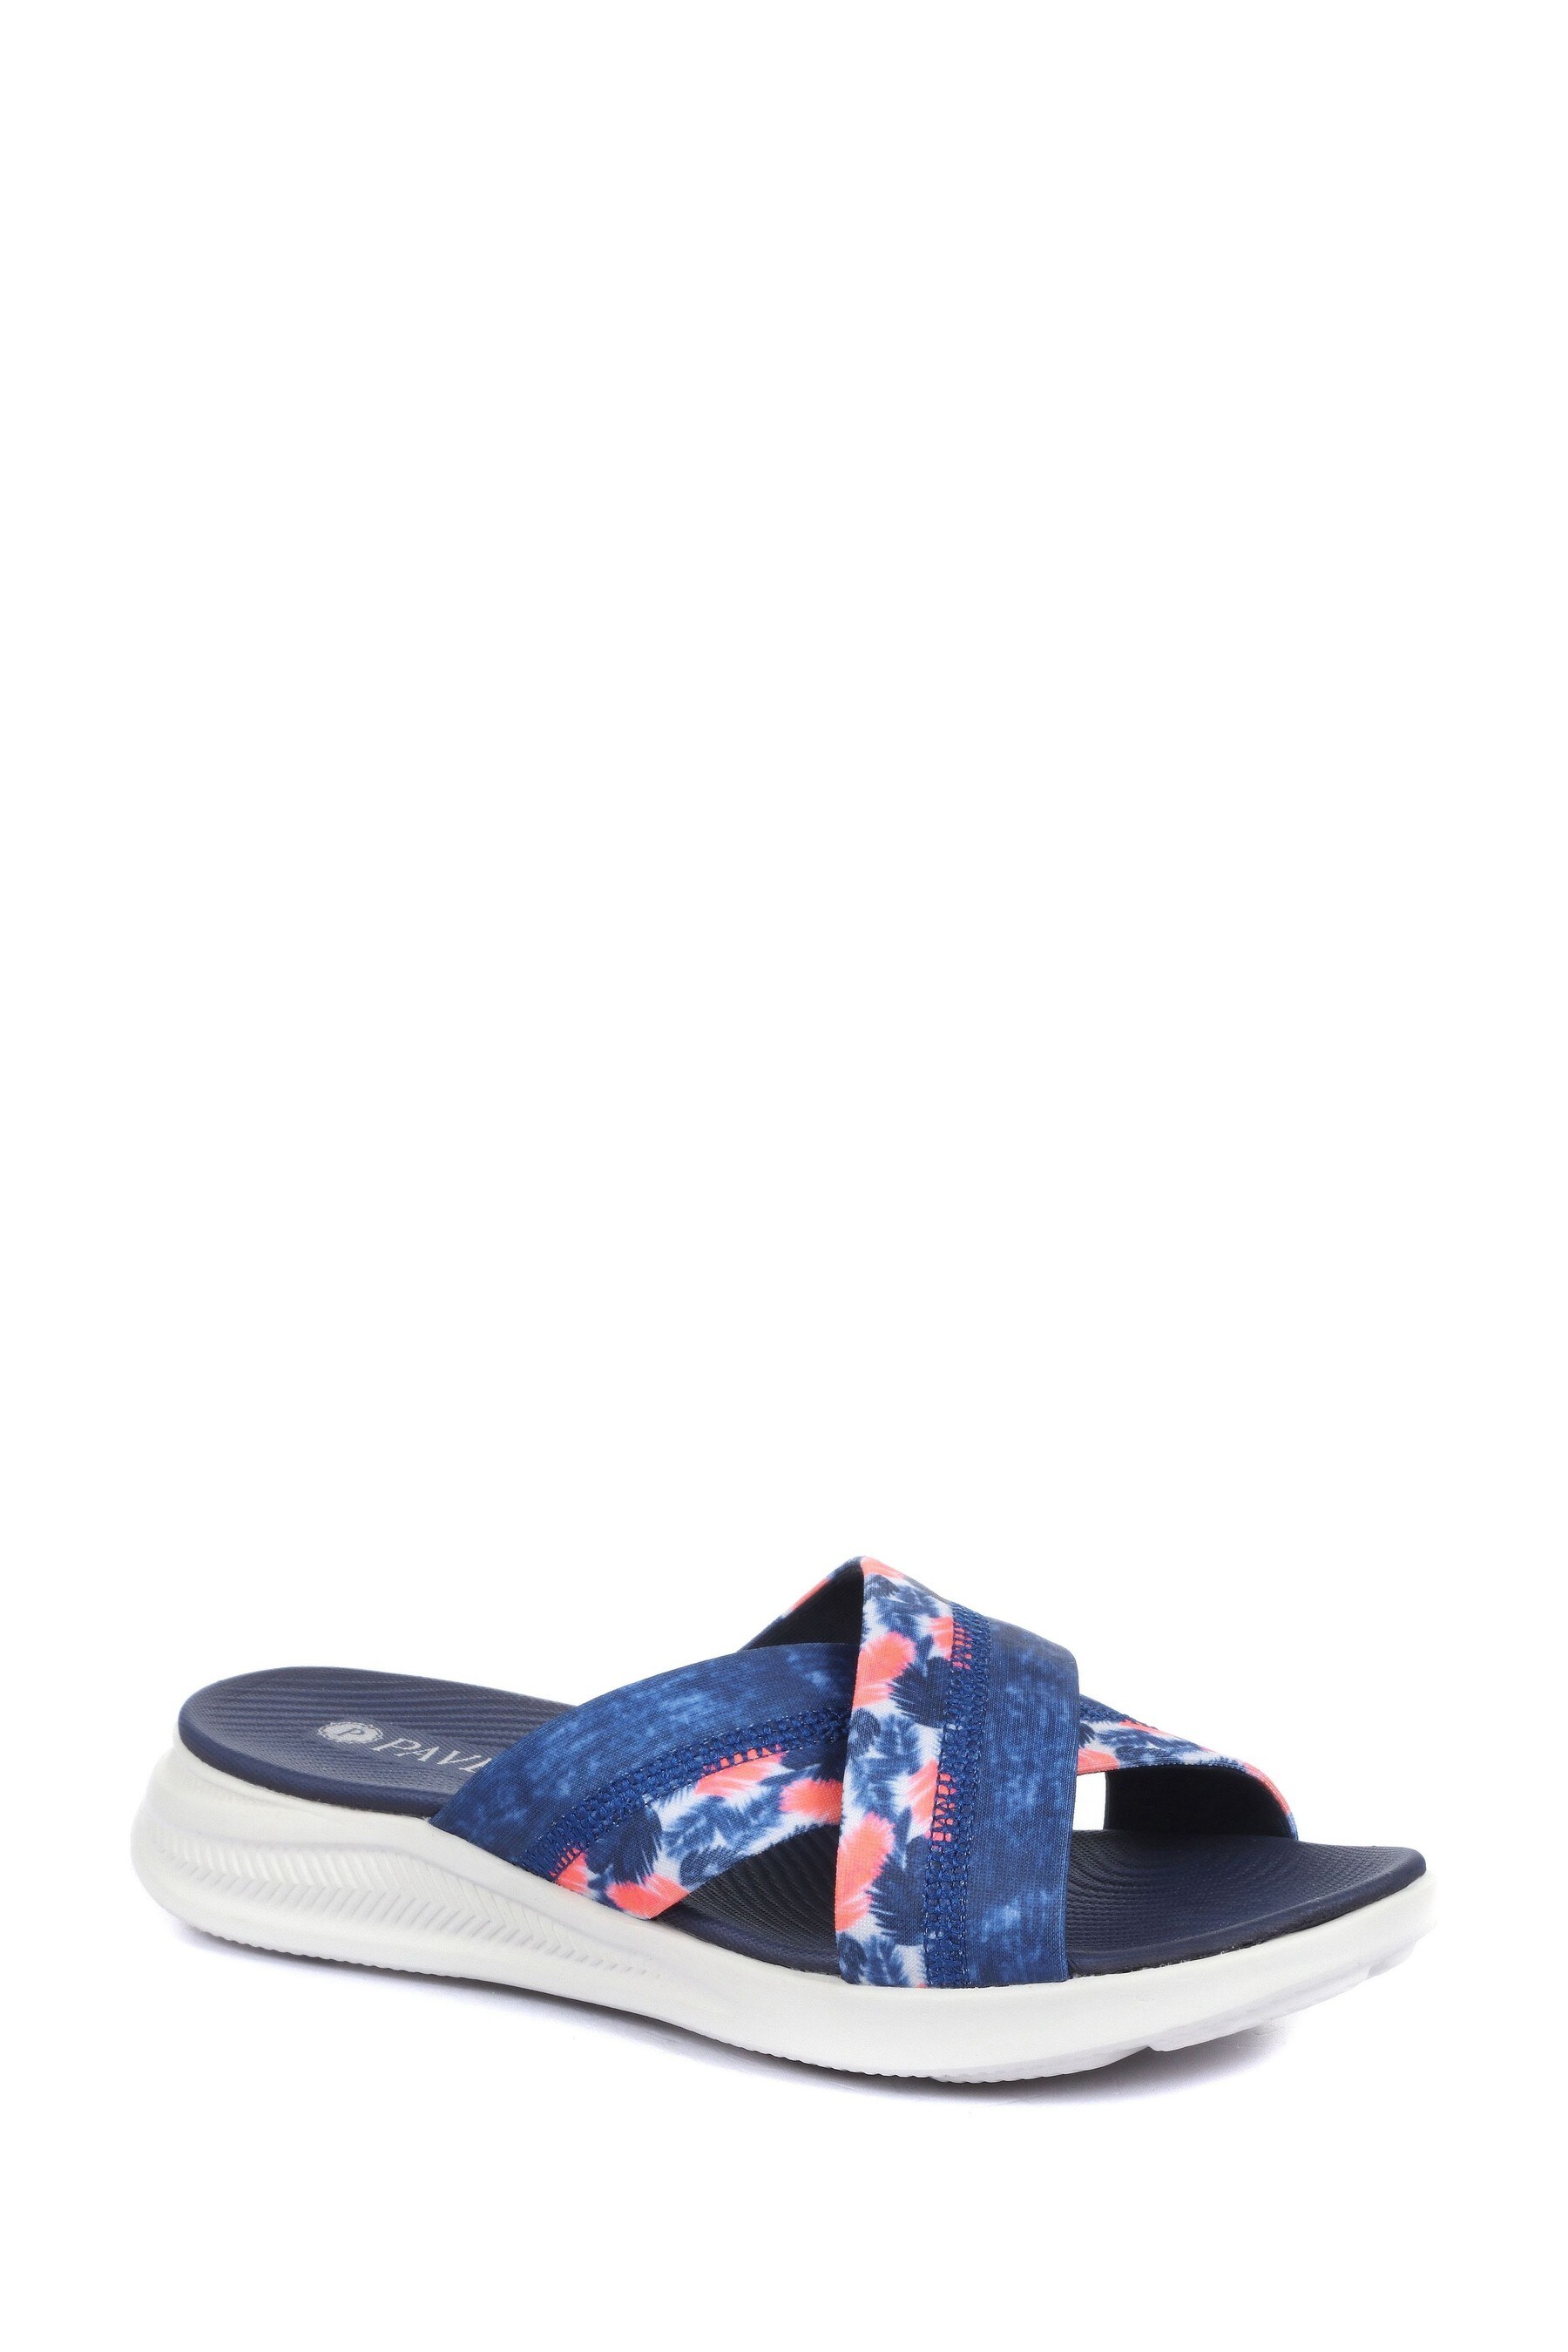 Buy Pavers Navy Lightweight Mule Sandals from the Next UK online shop